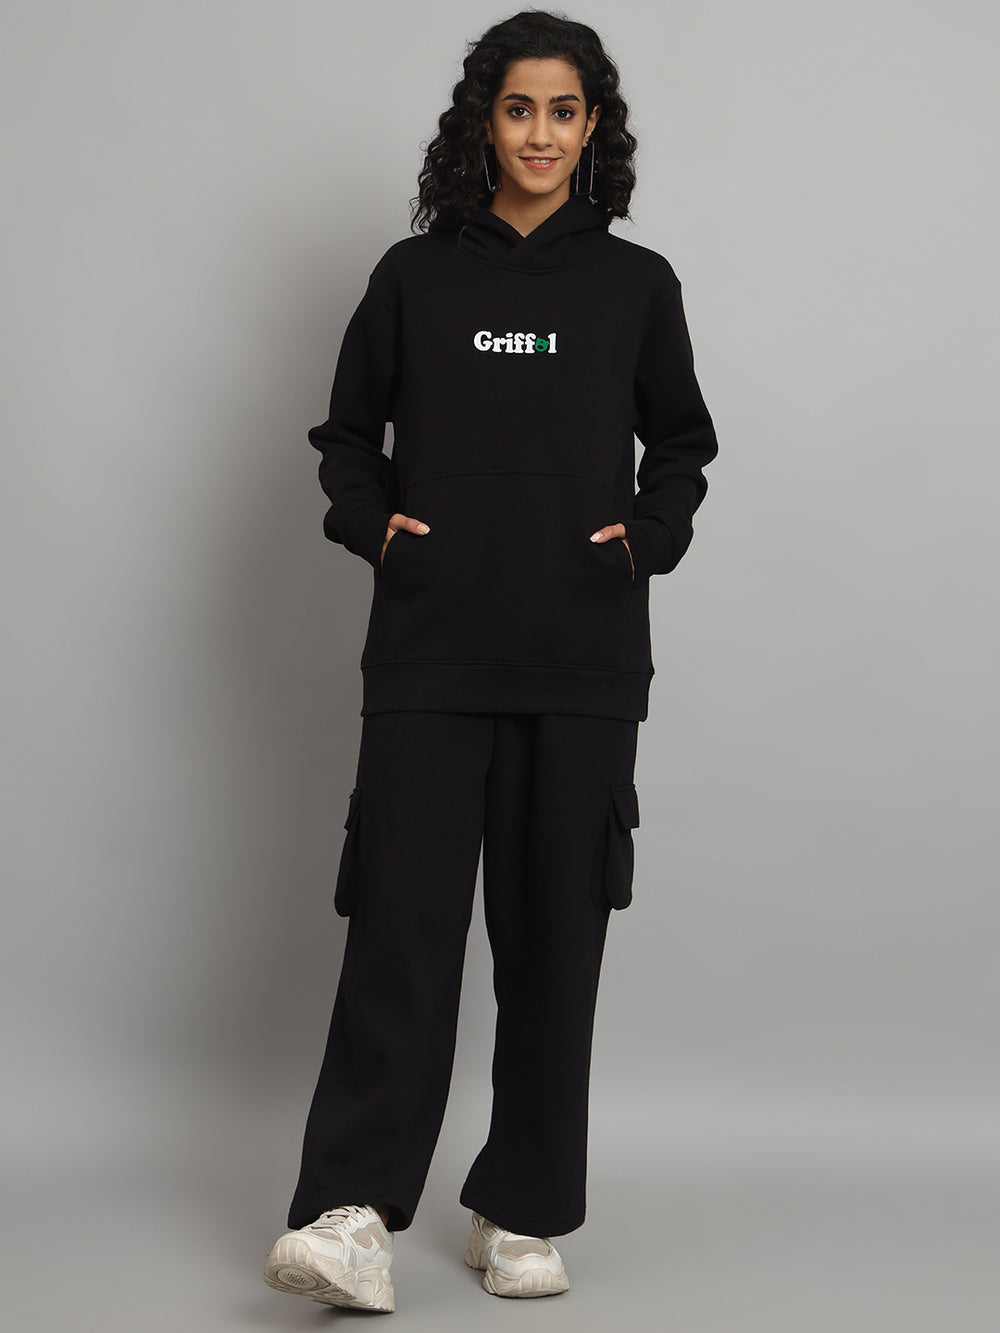 Griffel Women Oversized Fit HOW DO I Print 100% Cotton Black Fleece Hoodie and trackpant - griffel